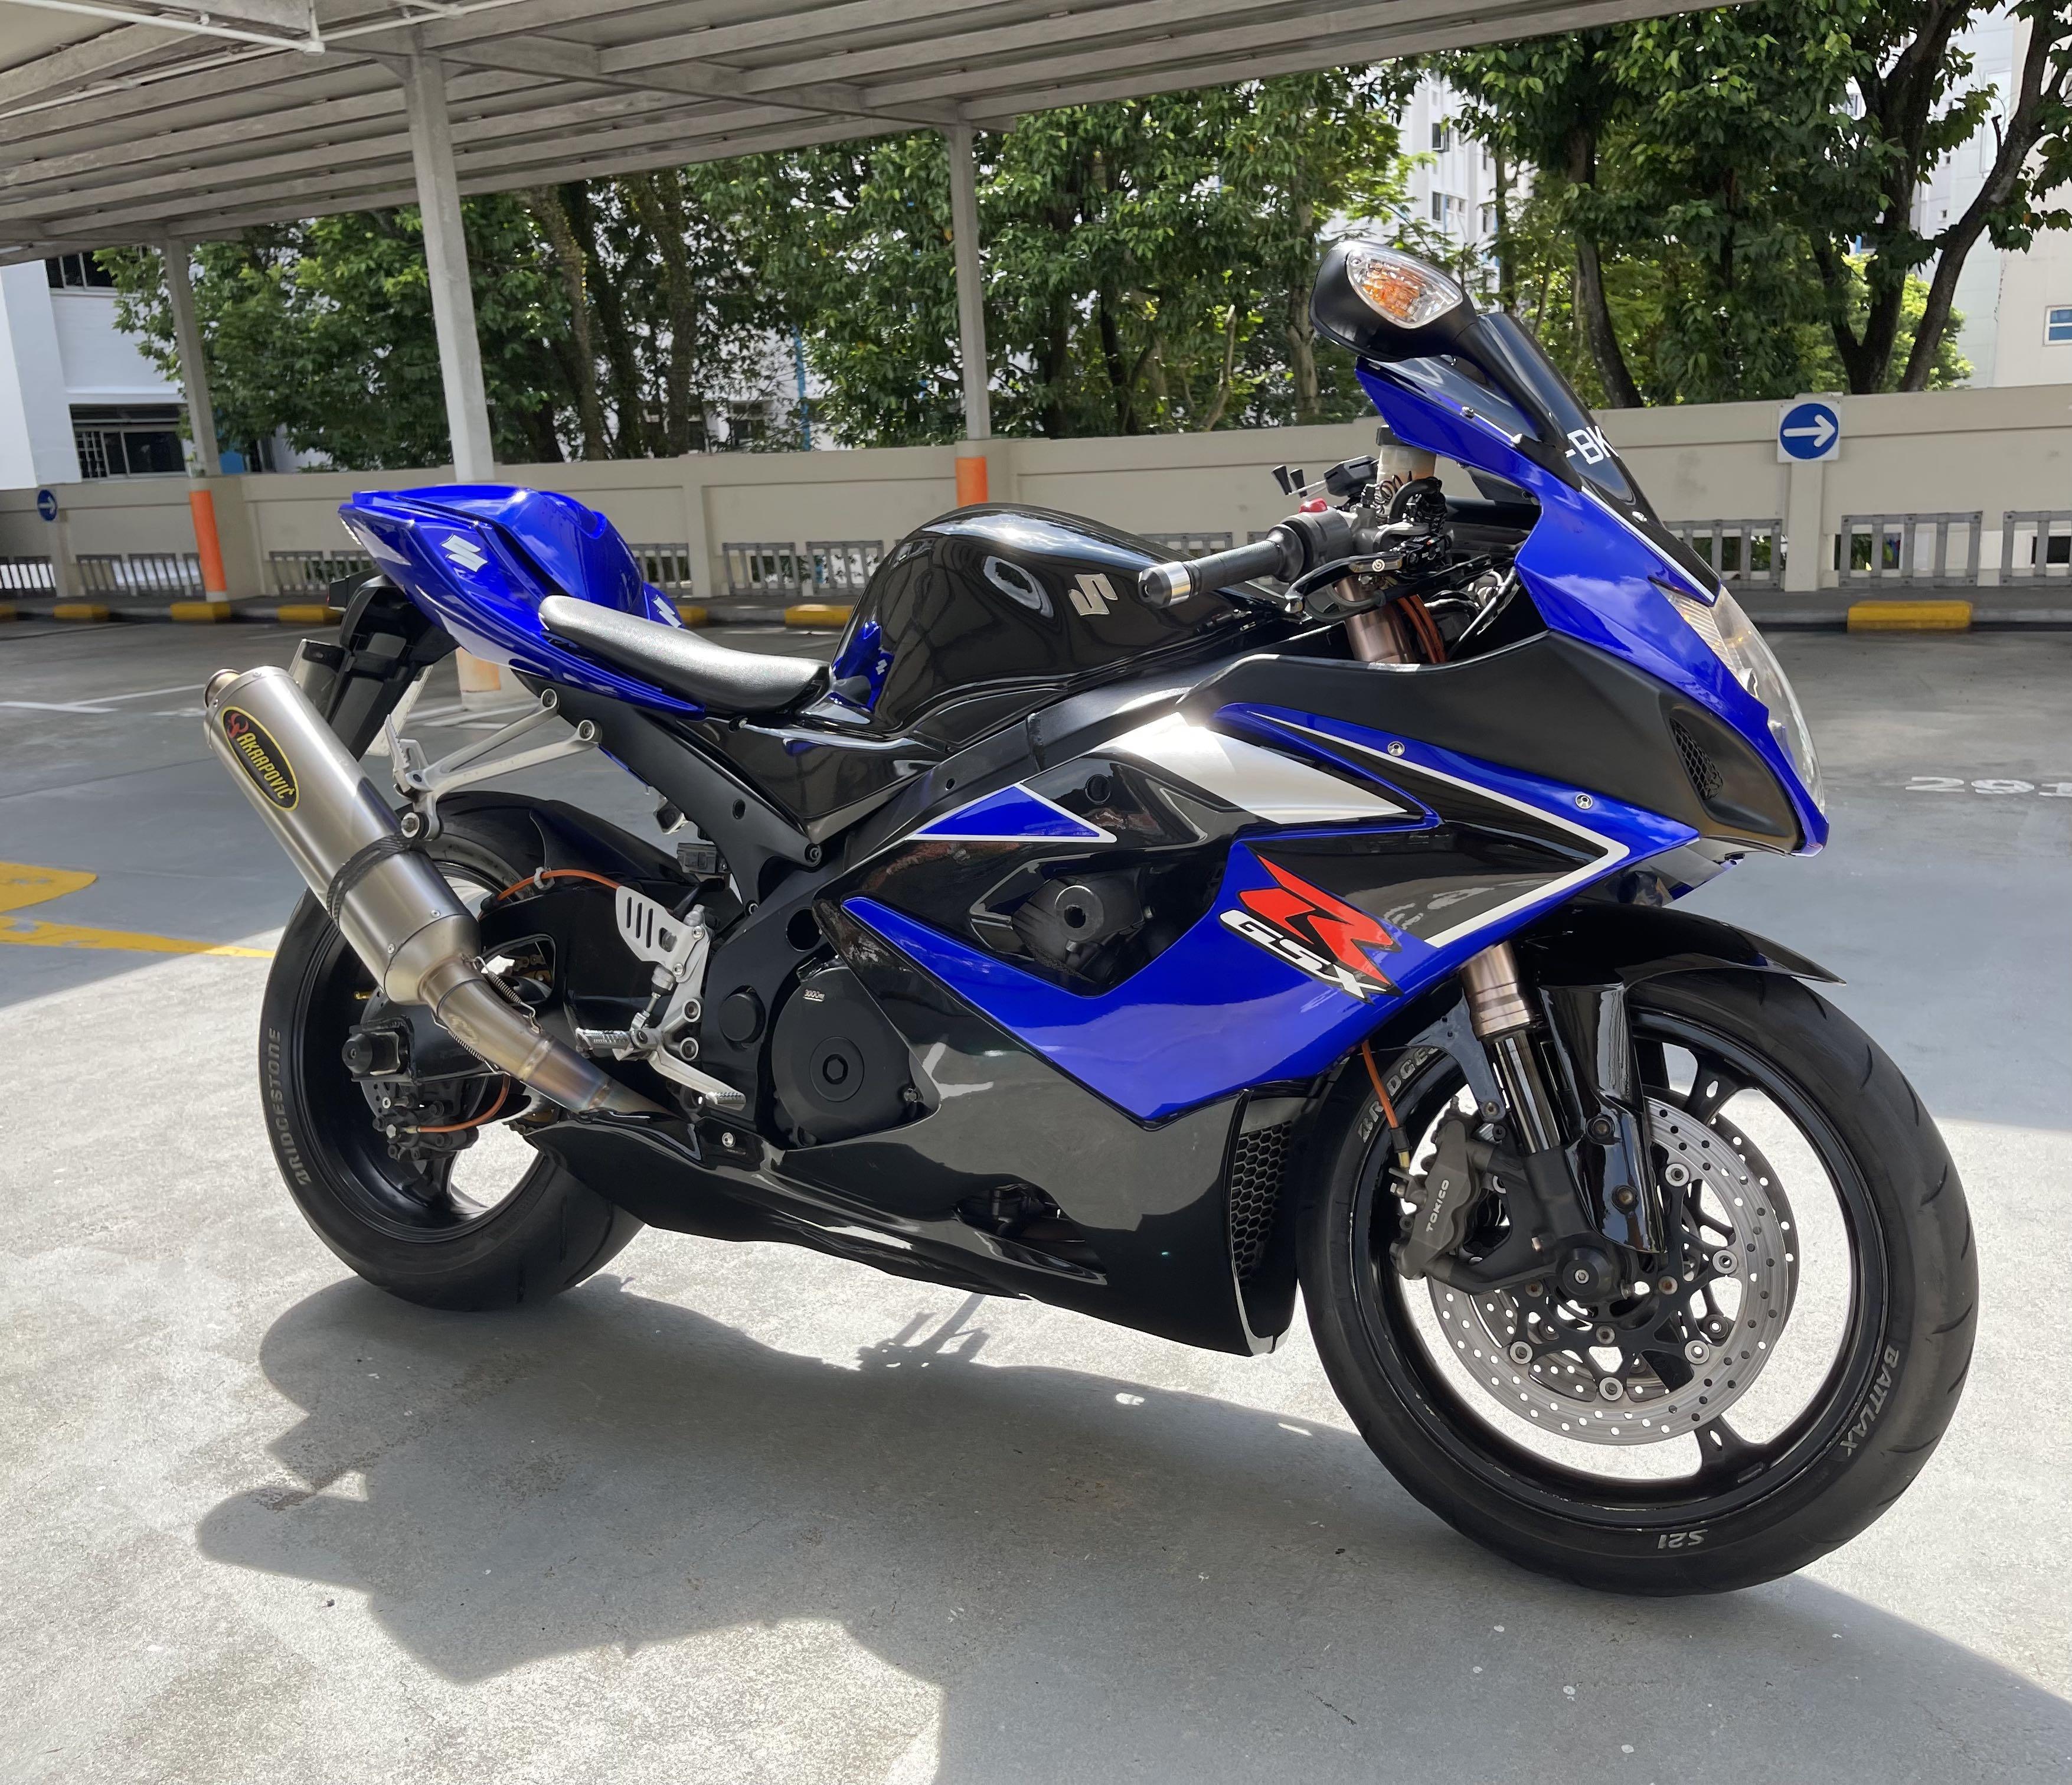 Suzuki GSX-R 1000 K5 with Full System Titanium Akrapovic Exhaust (GSX-R1000/  GSXR 1000 / GSXR1000 K5), Motorcycles, Motorcycles for Sale, Class 2 on  Carousell